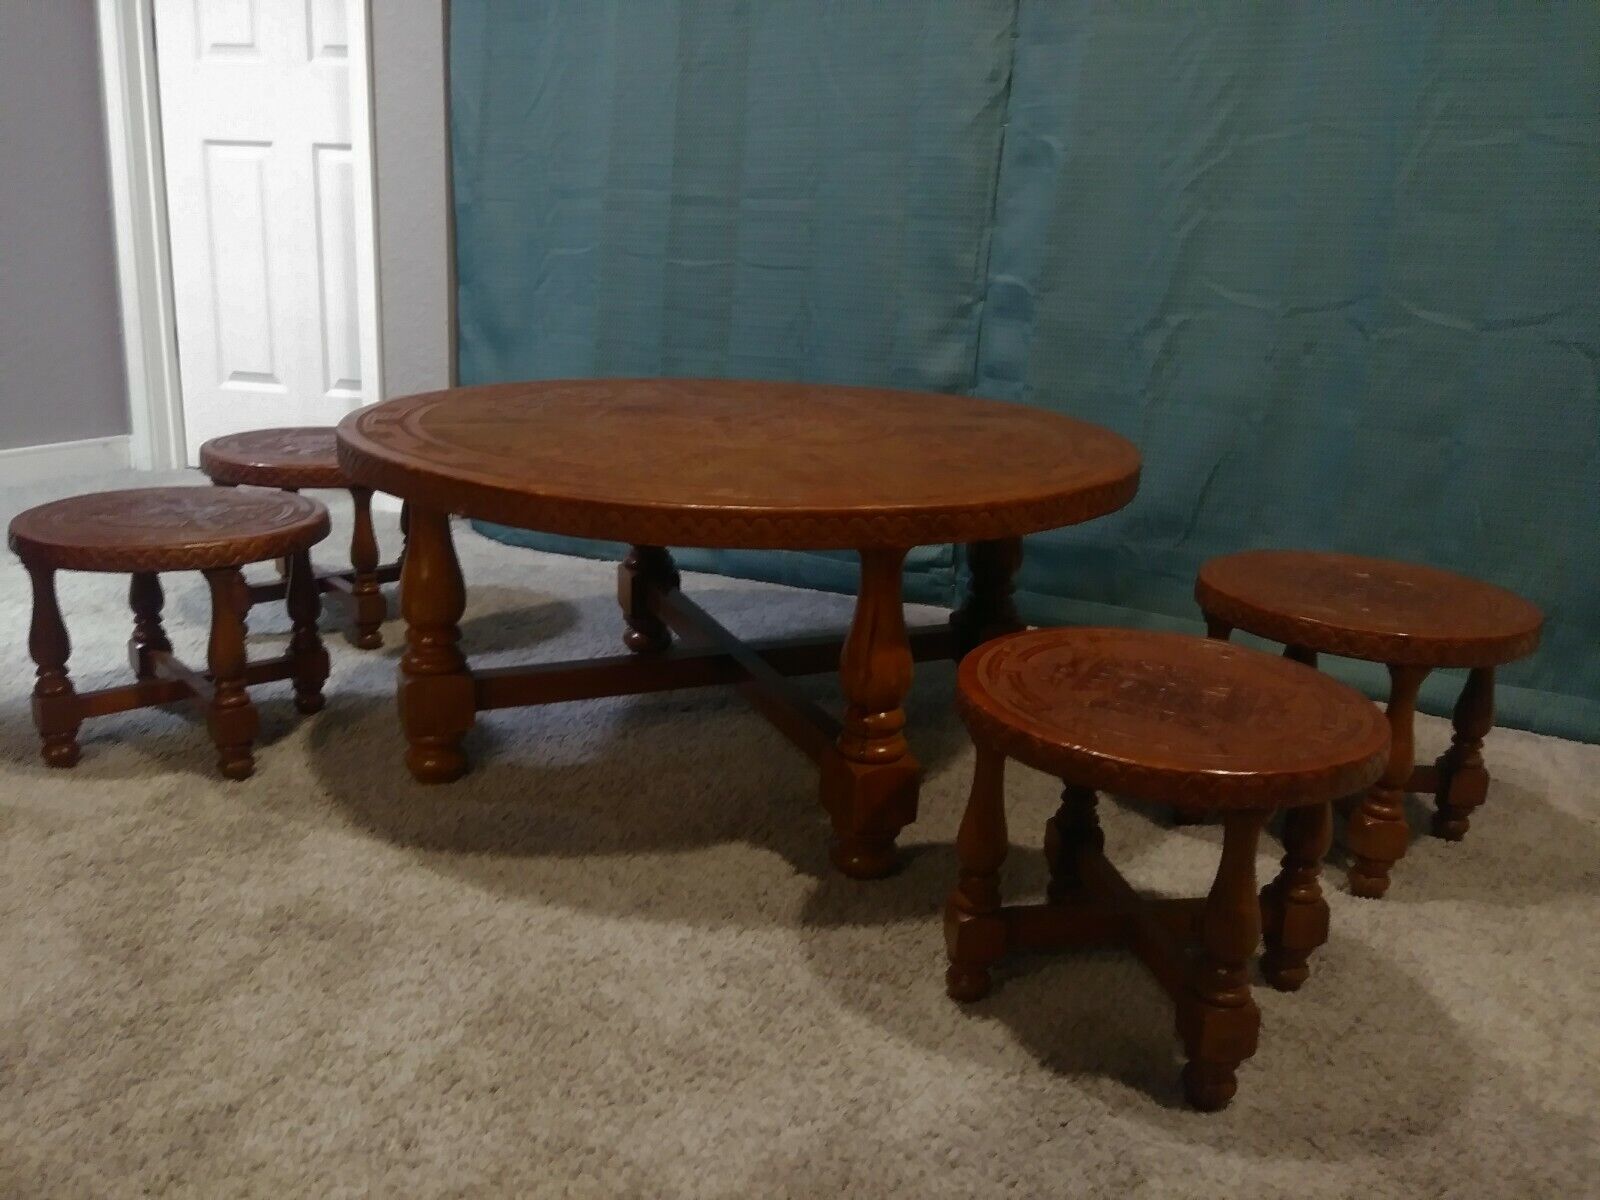 Vintage Rare Peruvian Hand Tooled Leather Wooden Coffee Table With 4 Stools Peruvian